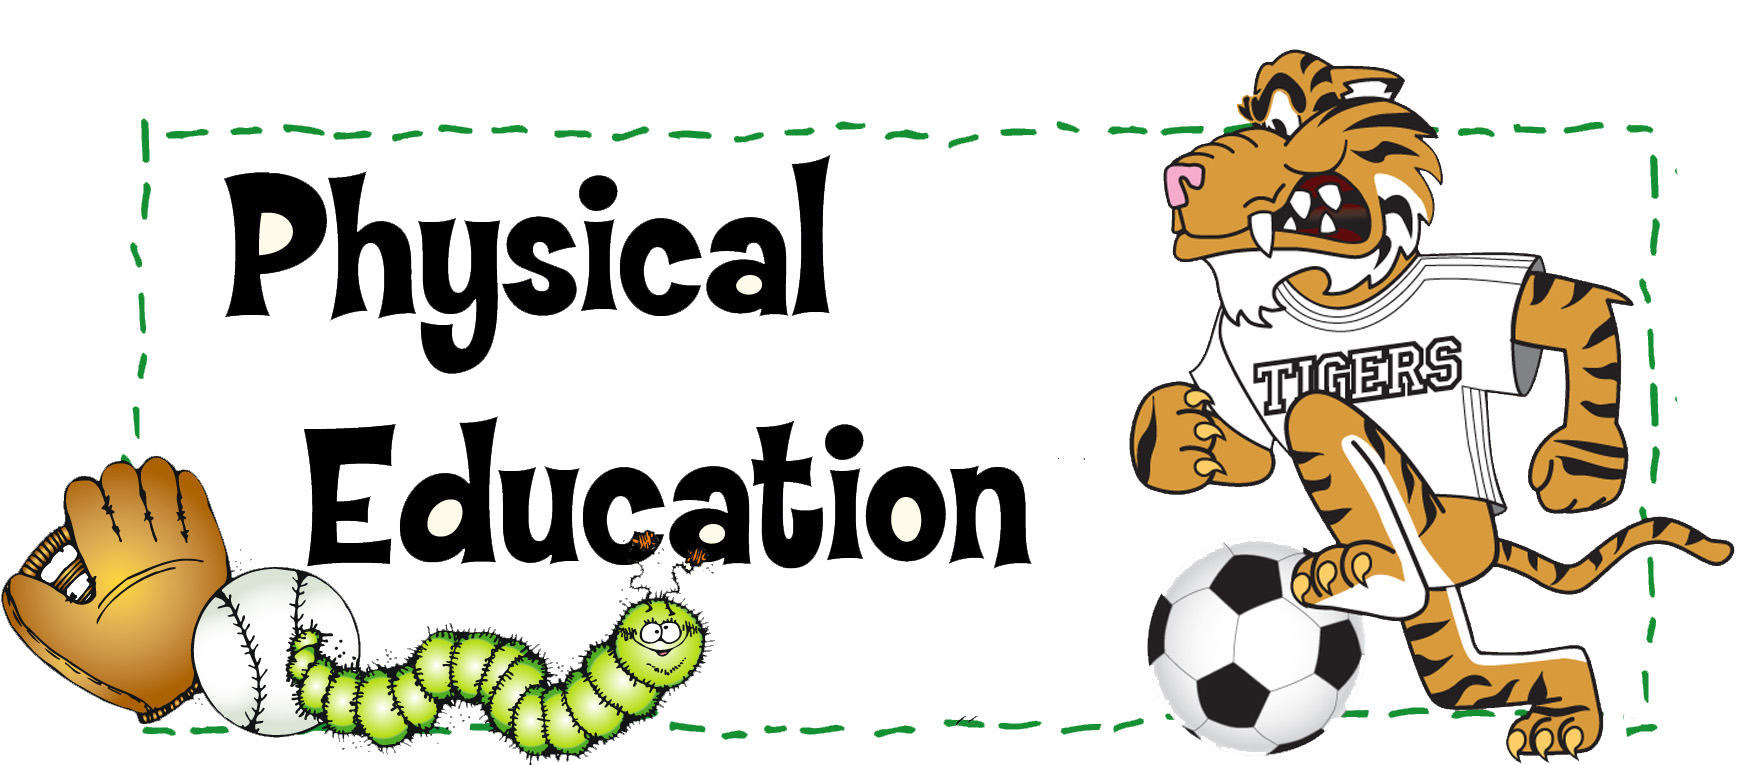 physical education clipart images - photo #19